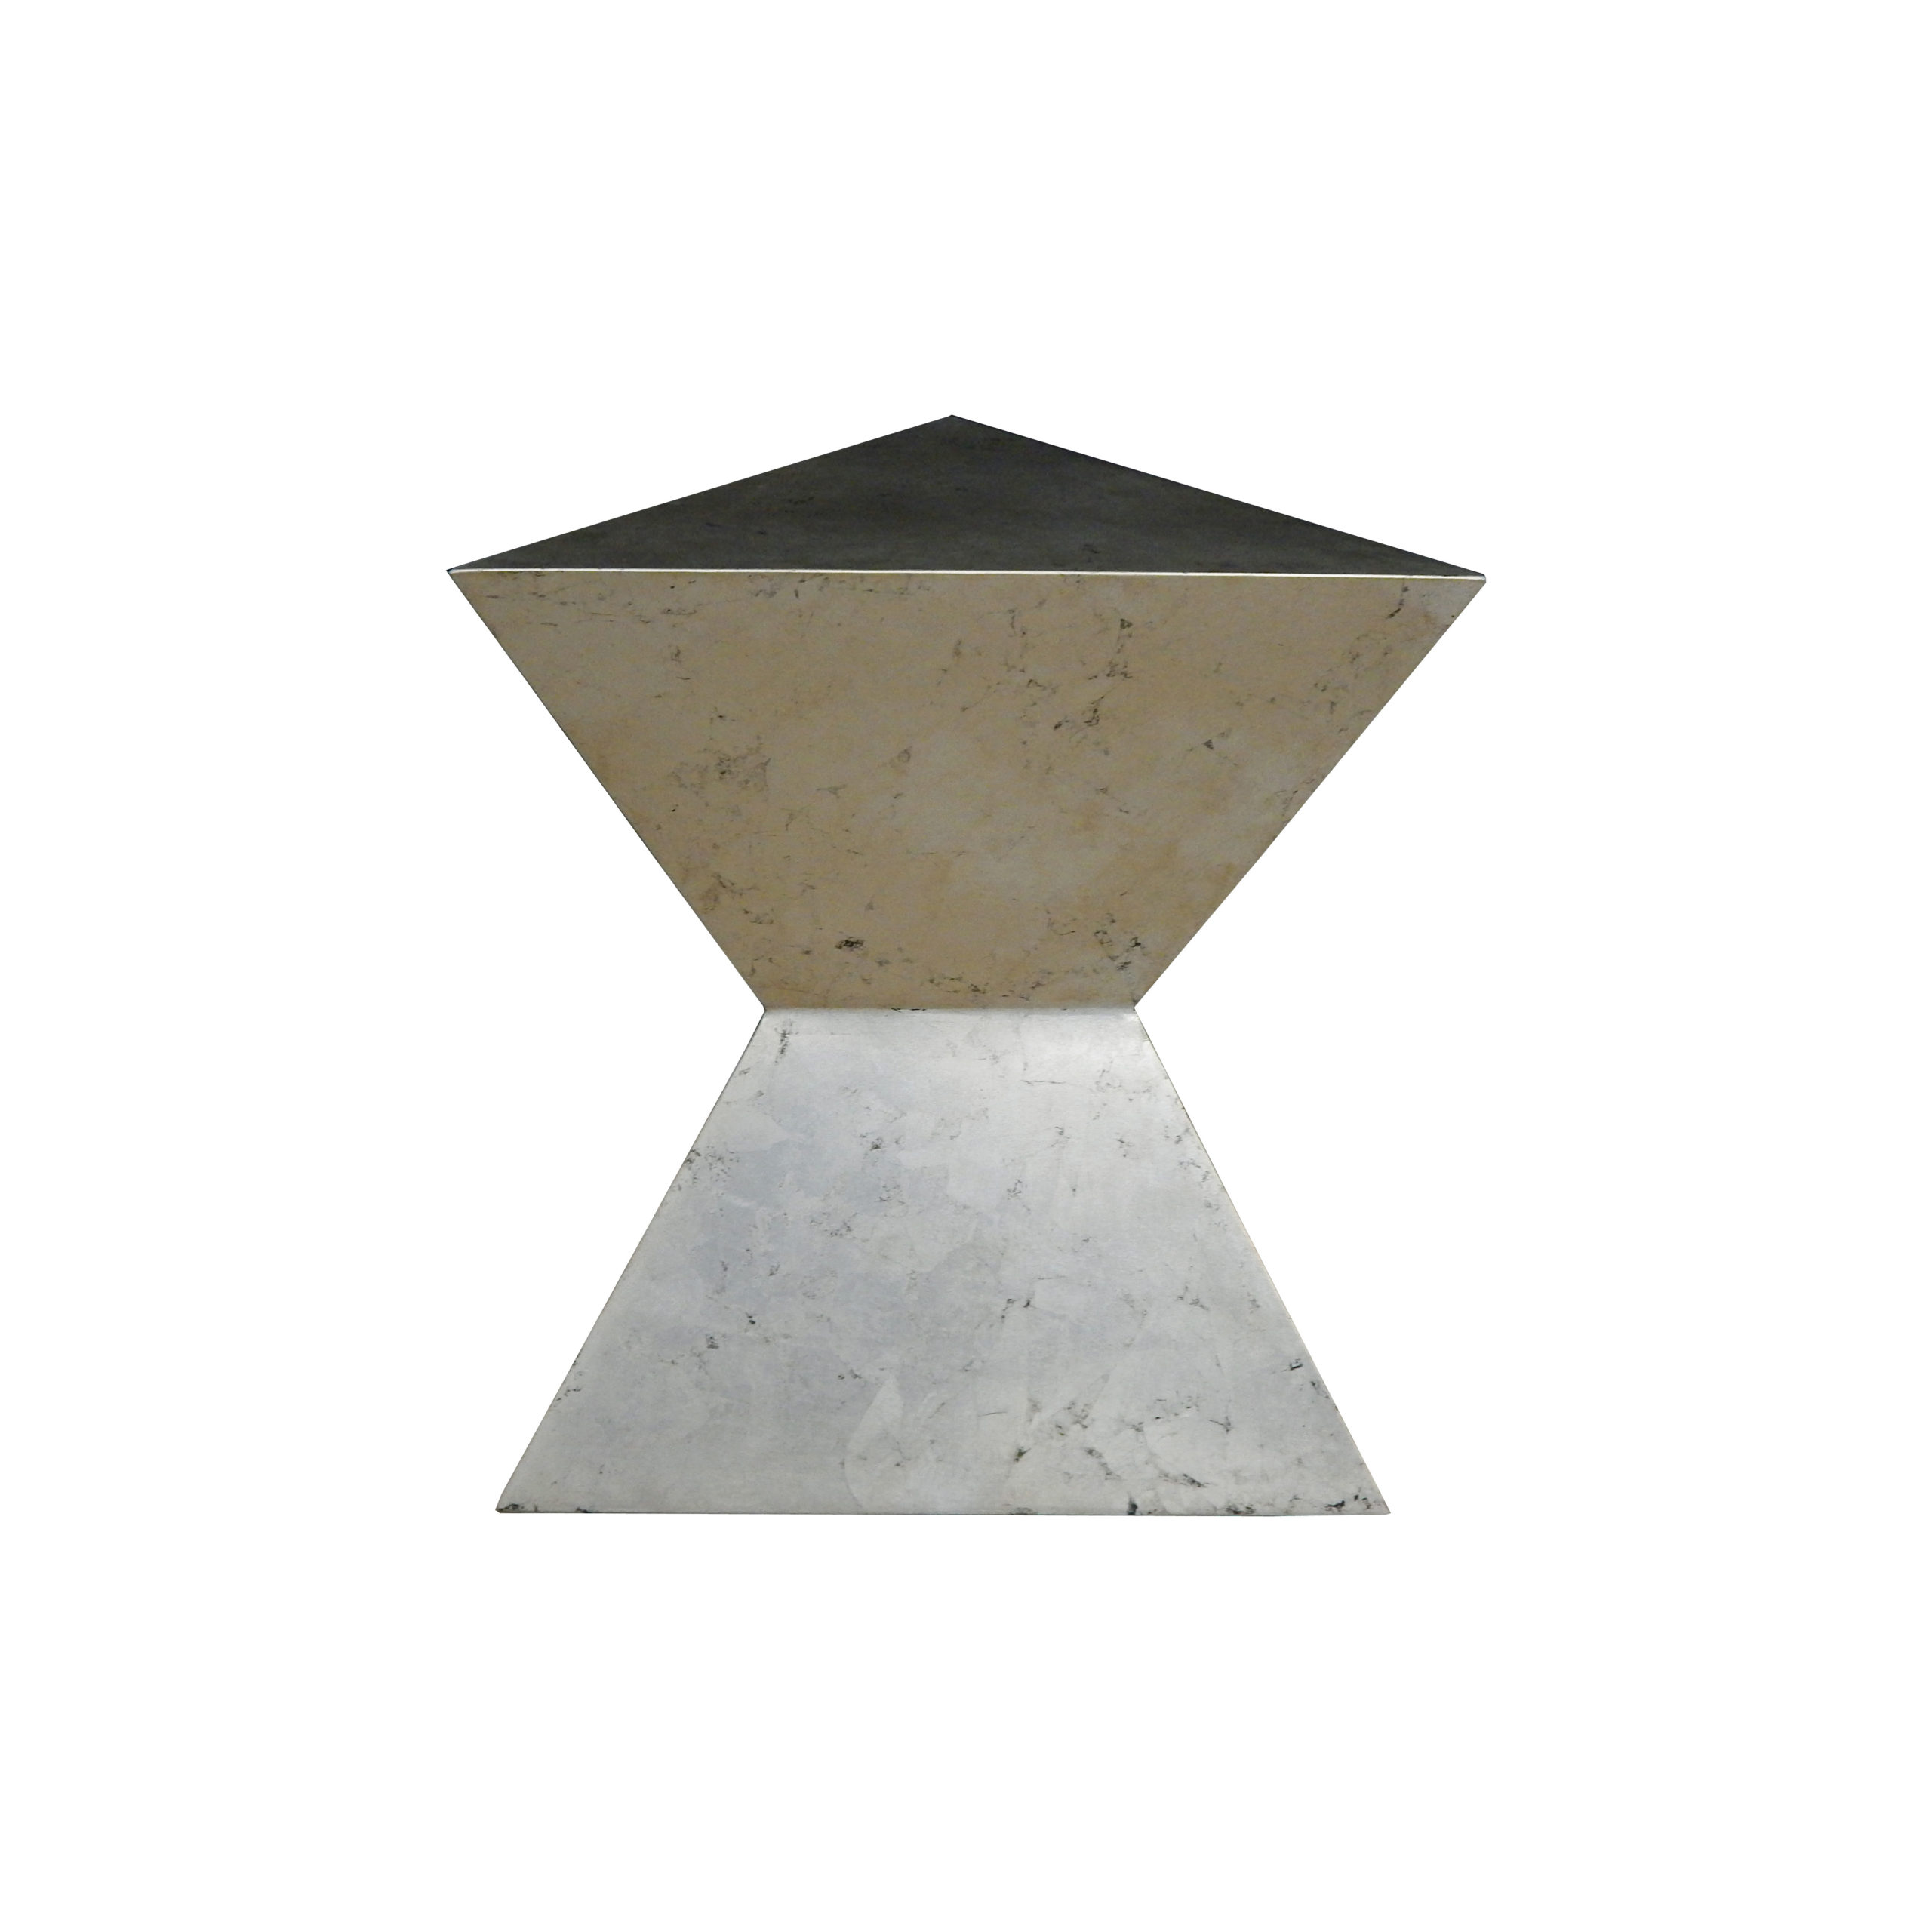 https://perryluxe.com/wp-content/uploads/2020/12/Anasazi-Triangle-End-Table-in-Silver-Tea-product-scaled.jpg